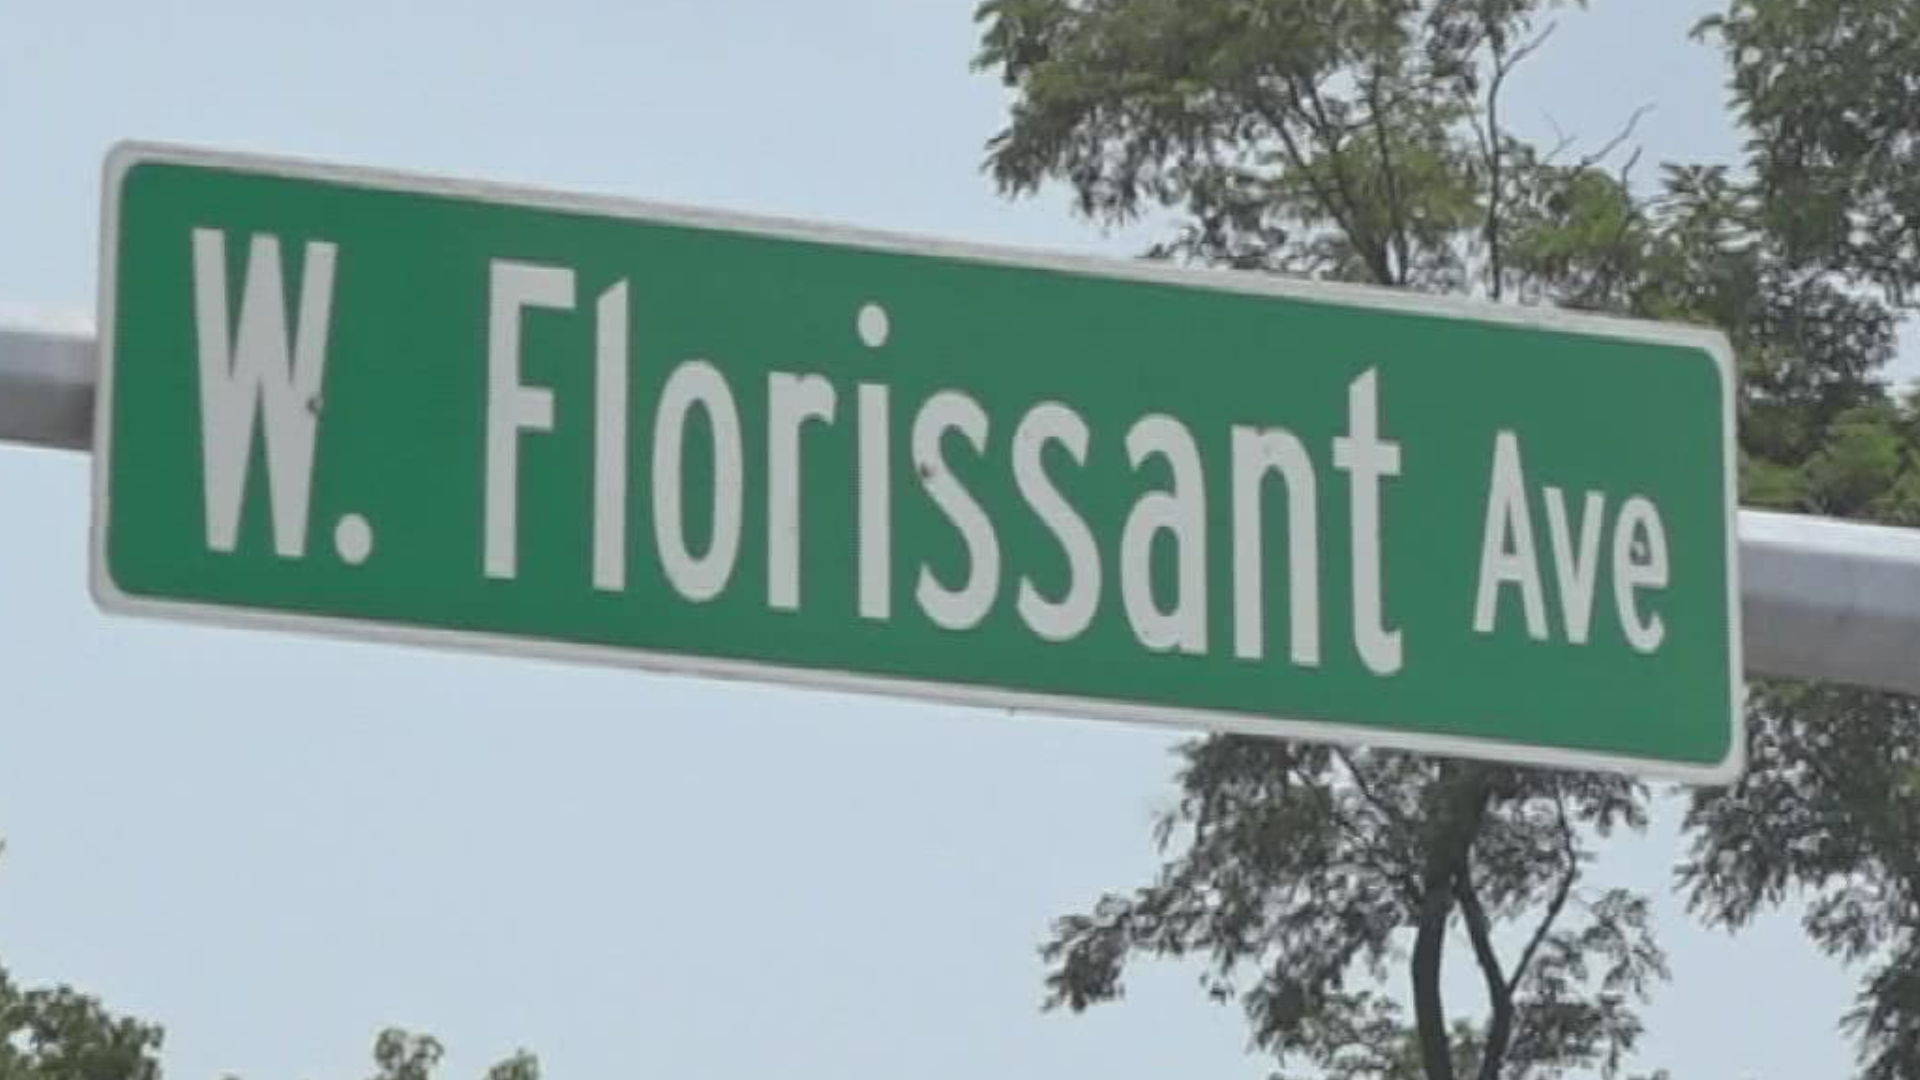 The $32 million RAISE grant from the U.S. Dept. of Transportation will help with improving safety for drivers and pedestrians on West Florissant Avenue